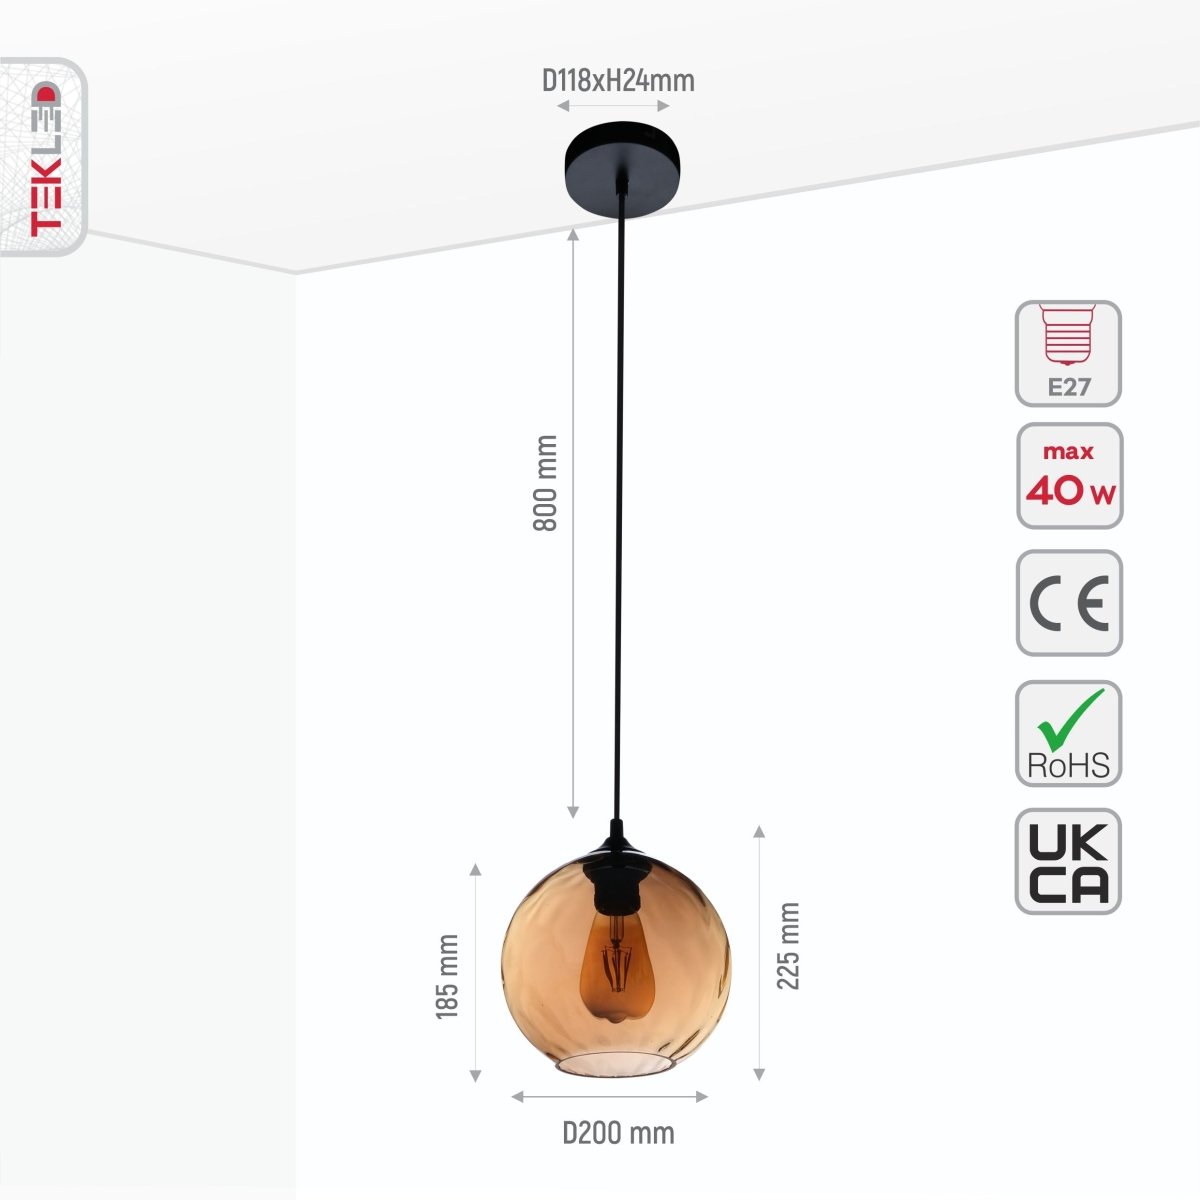 Size and specs of Amber Gold Glass Pendant Light D200 with E27 Fitting | TEKLED 158-196640